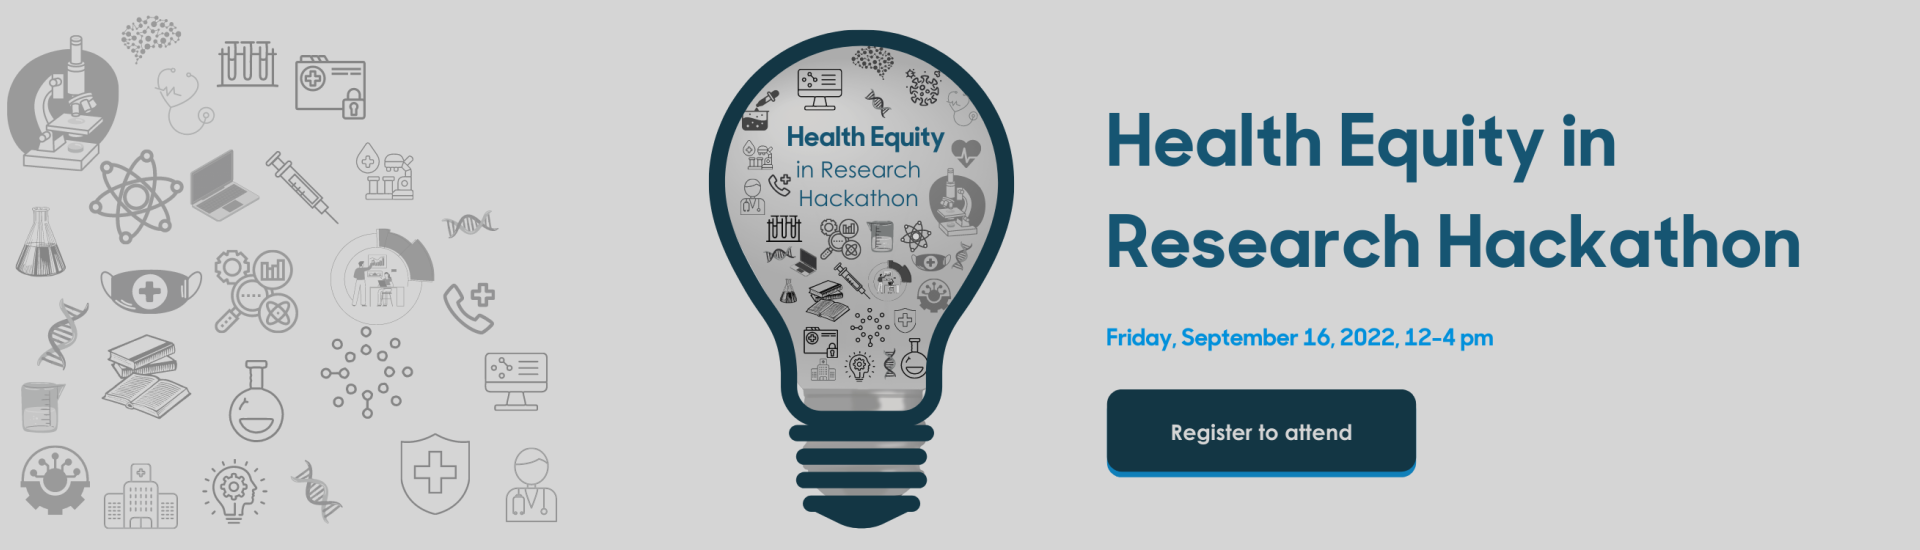 Light bulb with text next to it saying: Health Equity in Research Hackathon, Friday September 16, 2022, 12-4pm and a Register Now button